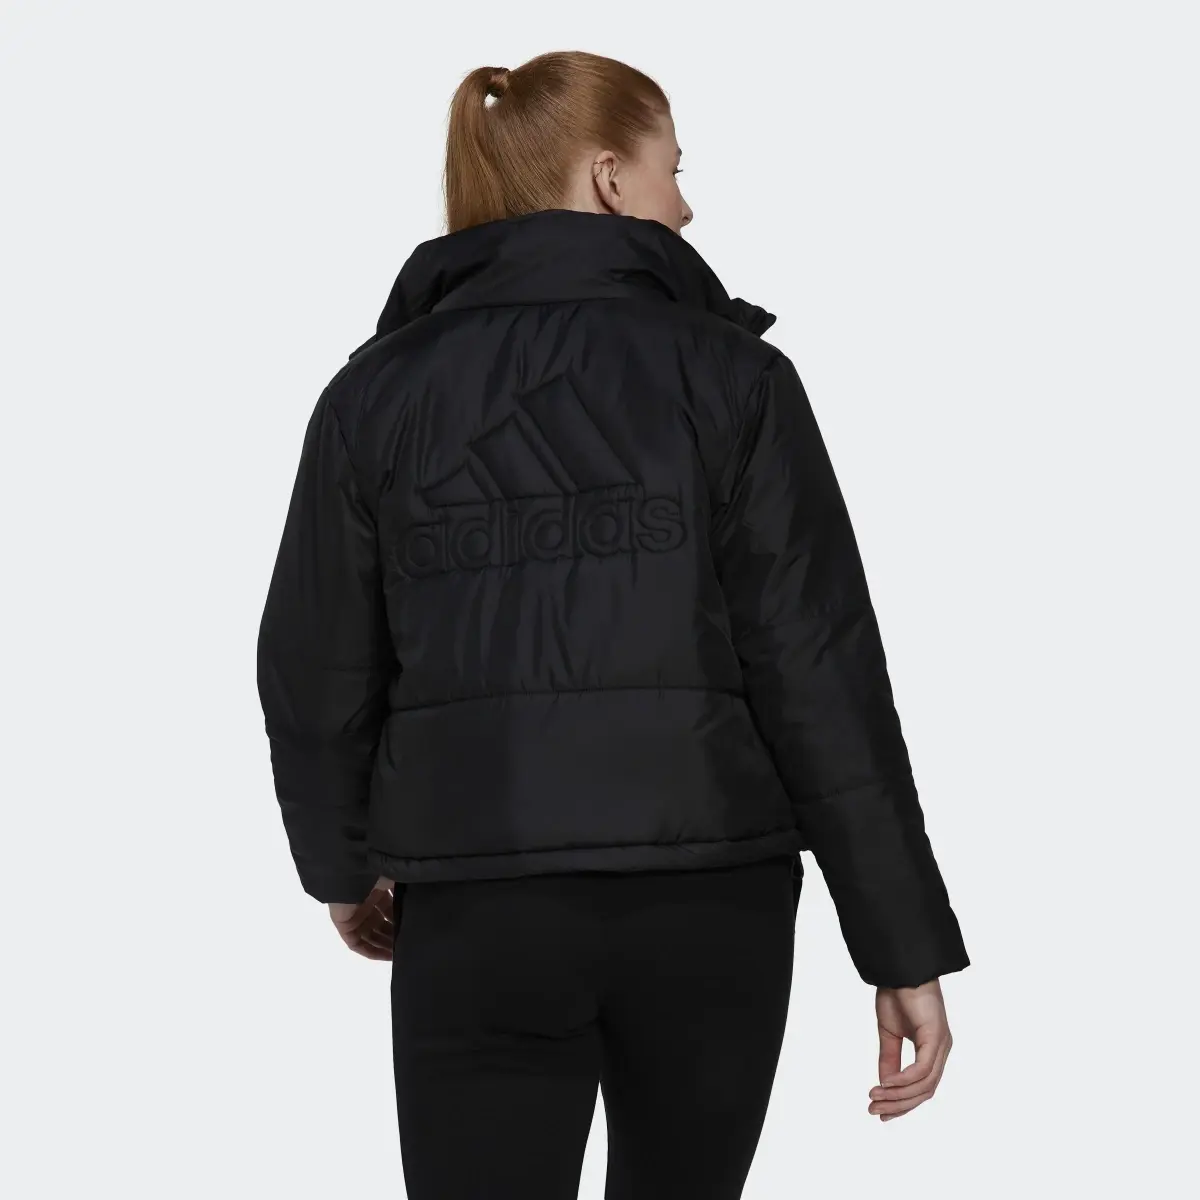 Adidas BSC Insulated Jacket. 3